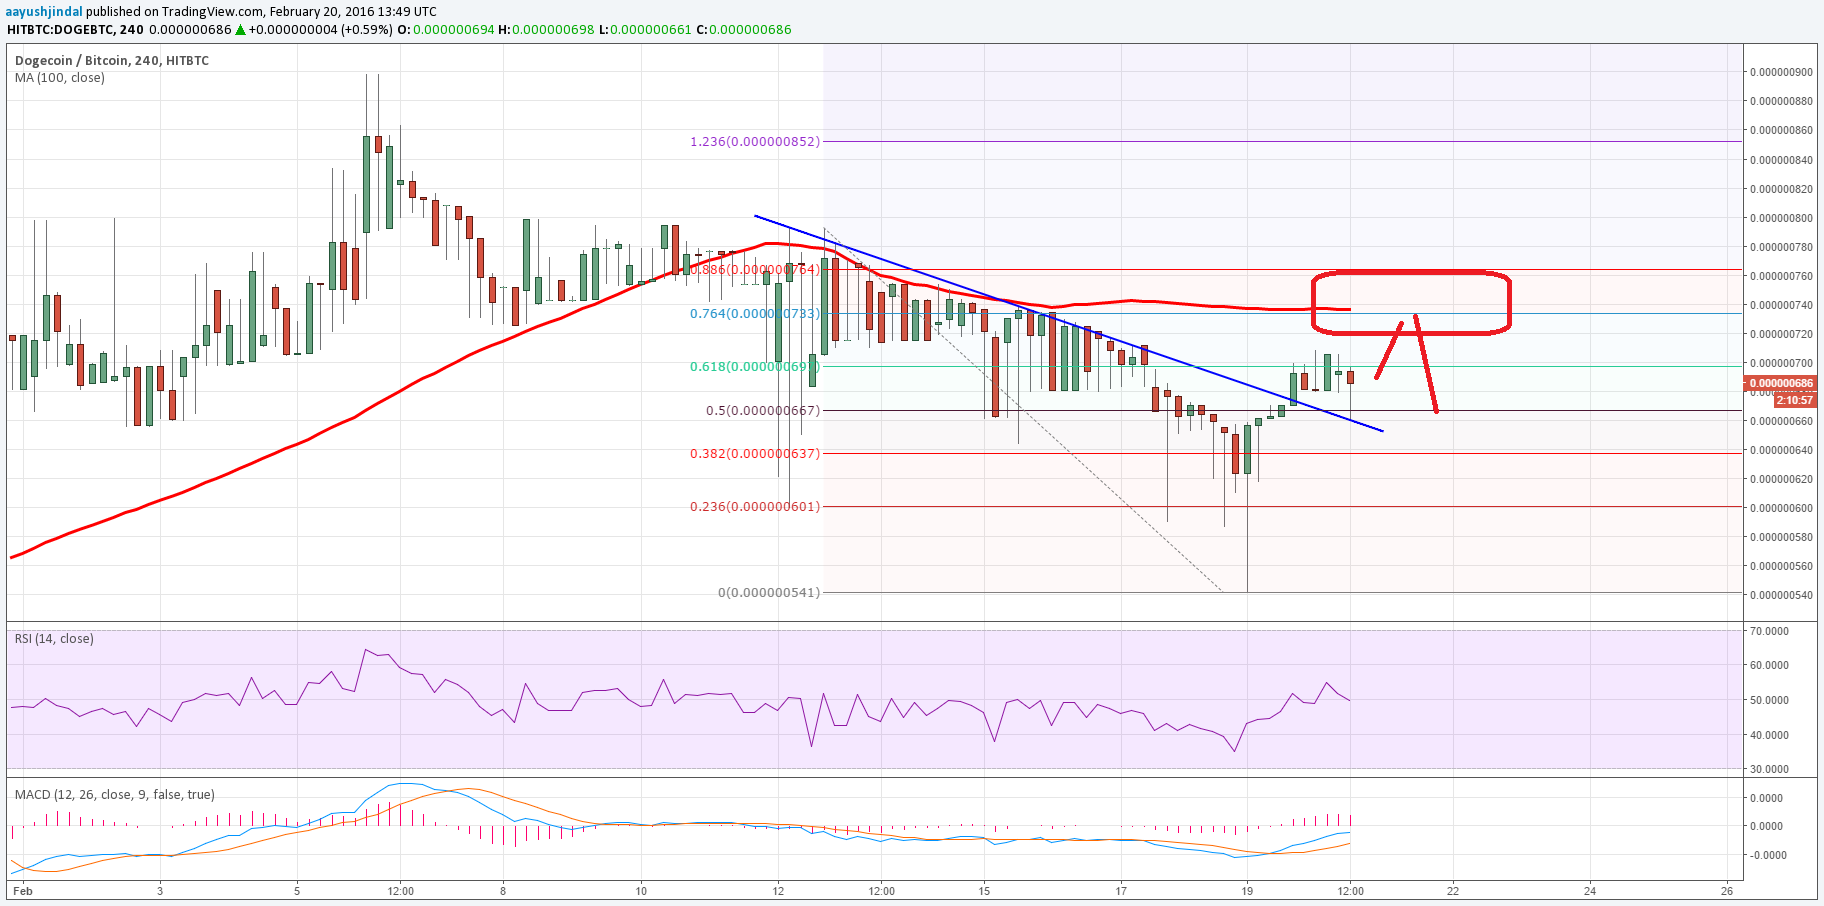 Dogecoin Price Weekly Analysis